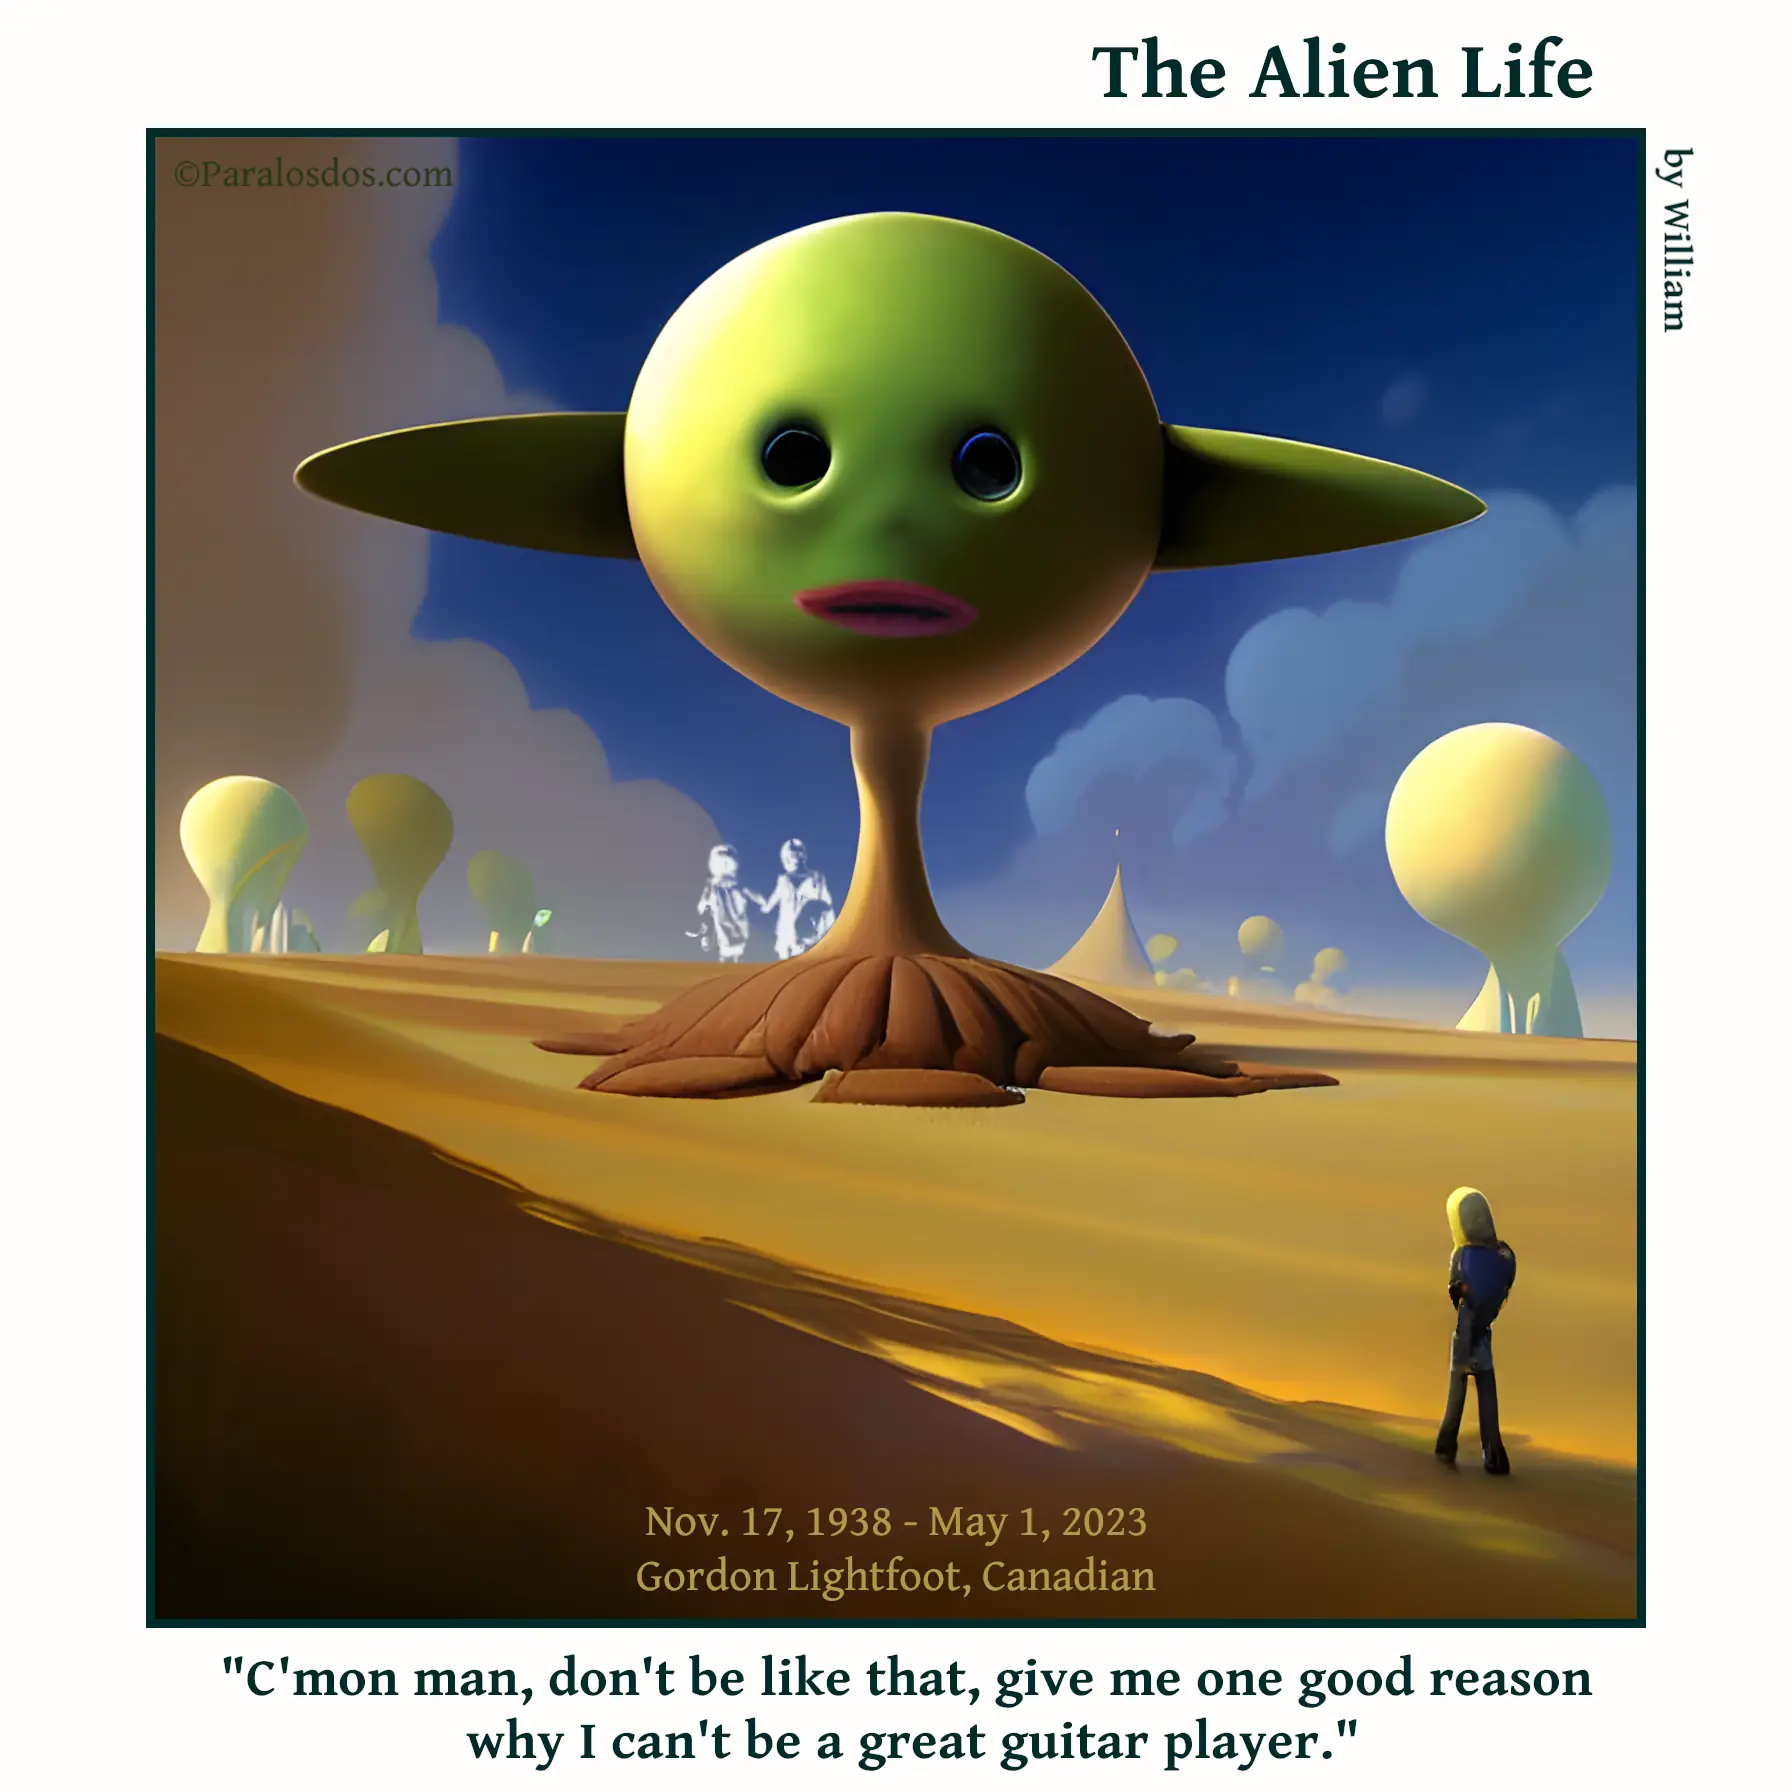 The Alien Life, one panel Comic. A huge alien with no arms is looking down at a tiny human figure. The caption reads: "C'mon man, don't be like that, give me one good reason why I can't be a great guitar player."